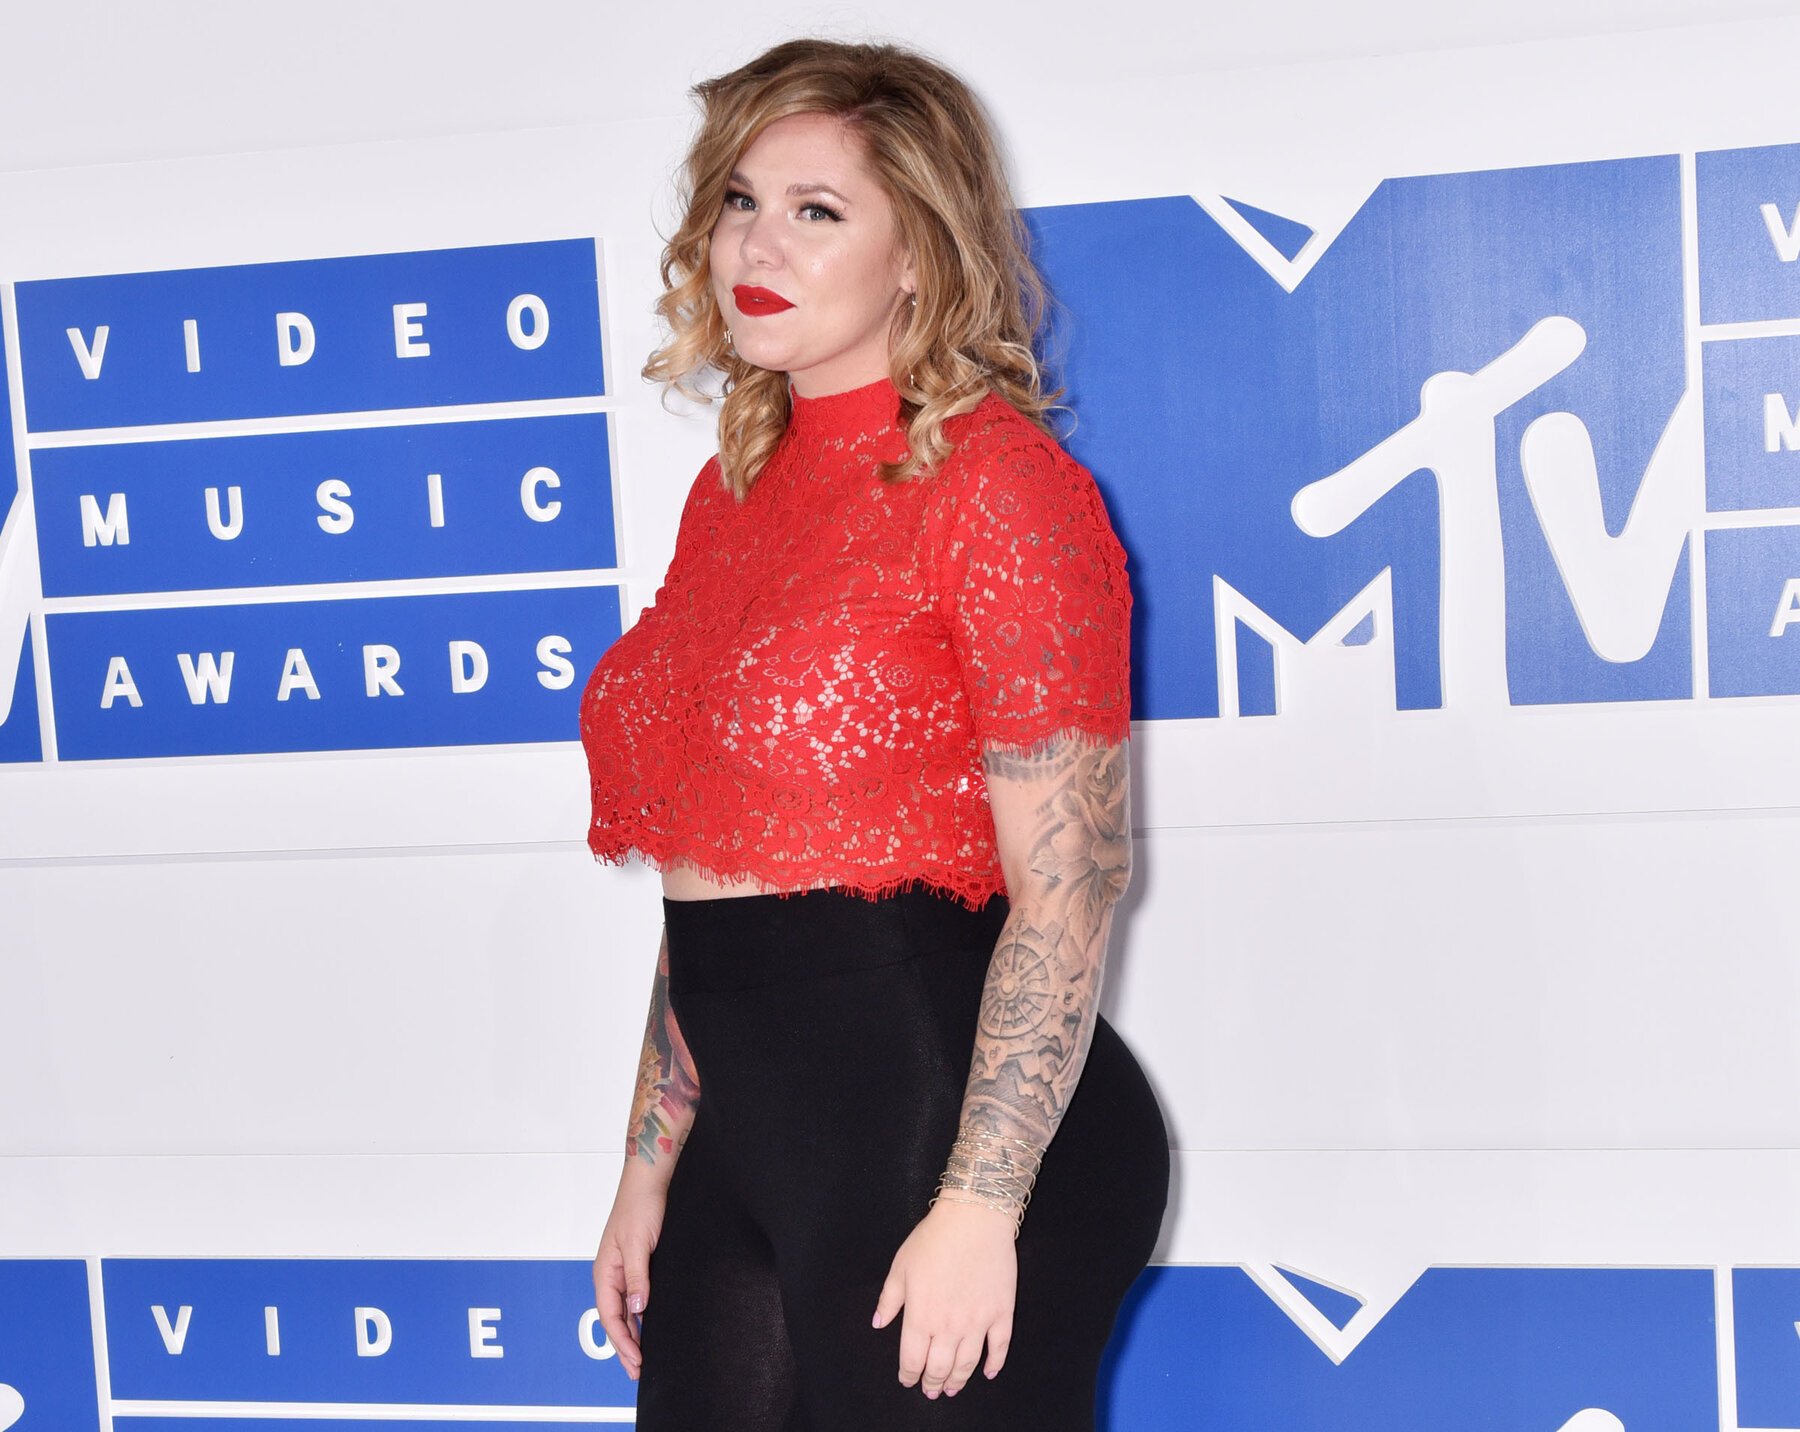 Kailyn Lowry at the 2016 MTV Video Music Awards